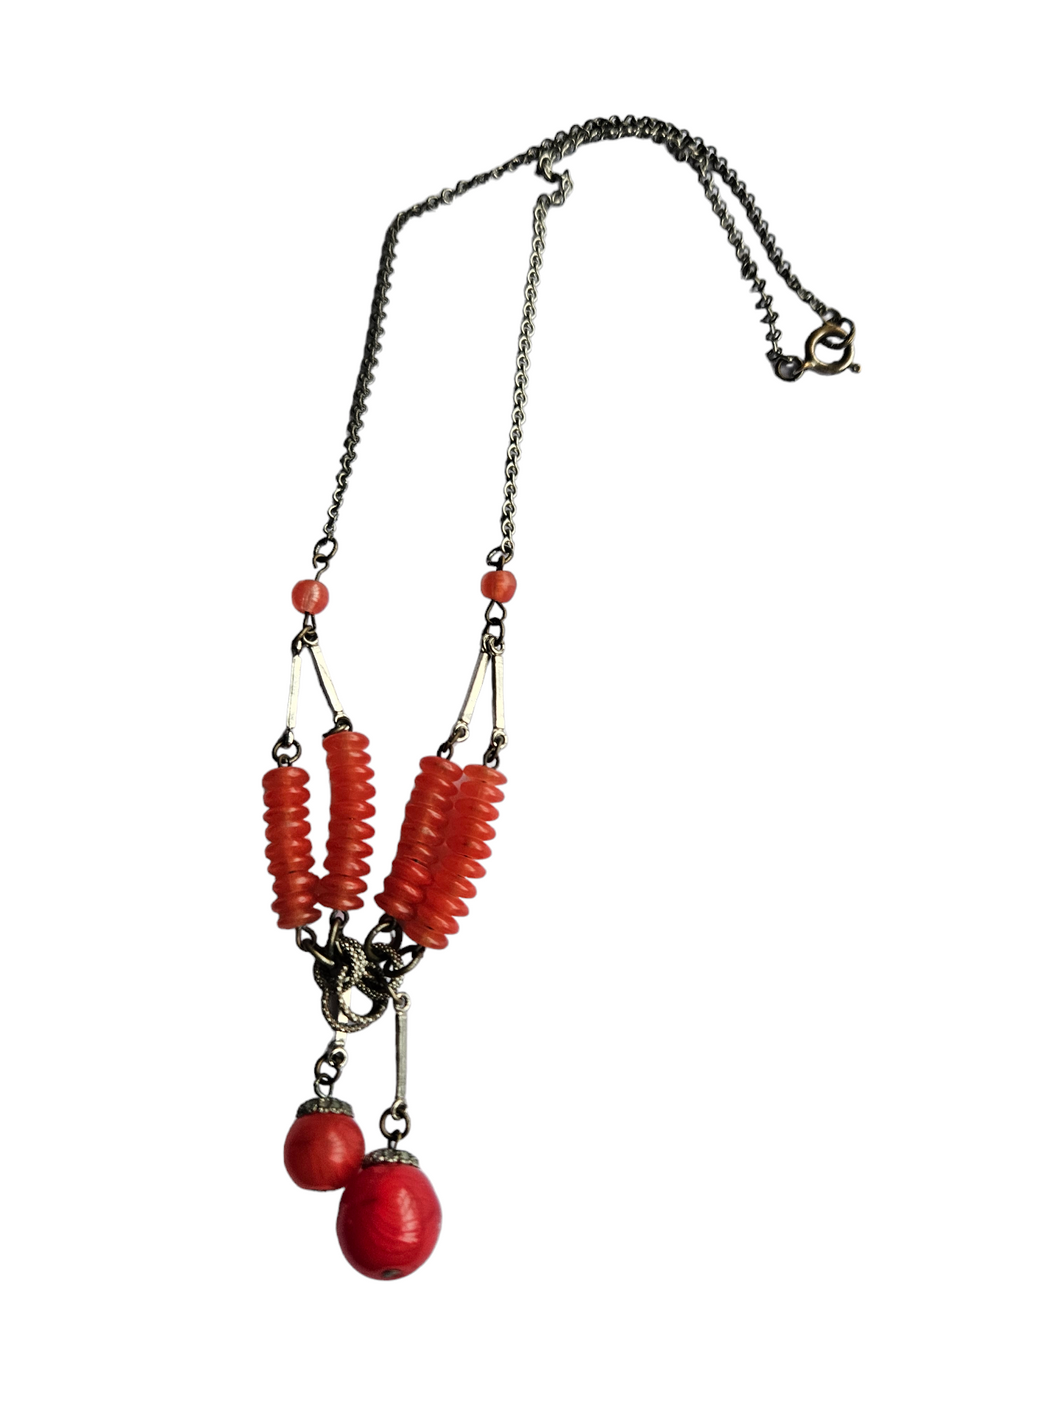 1930s Deco Red Glass Necklace